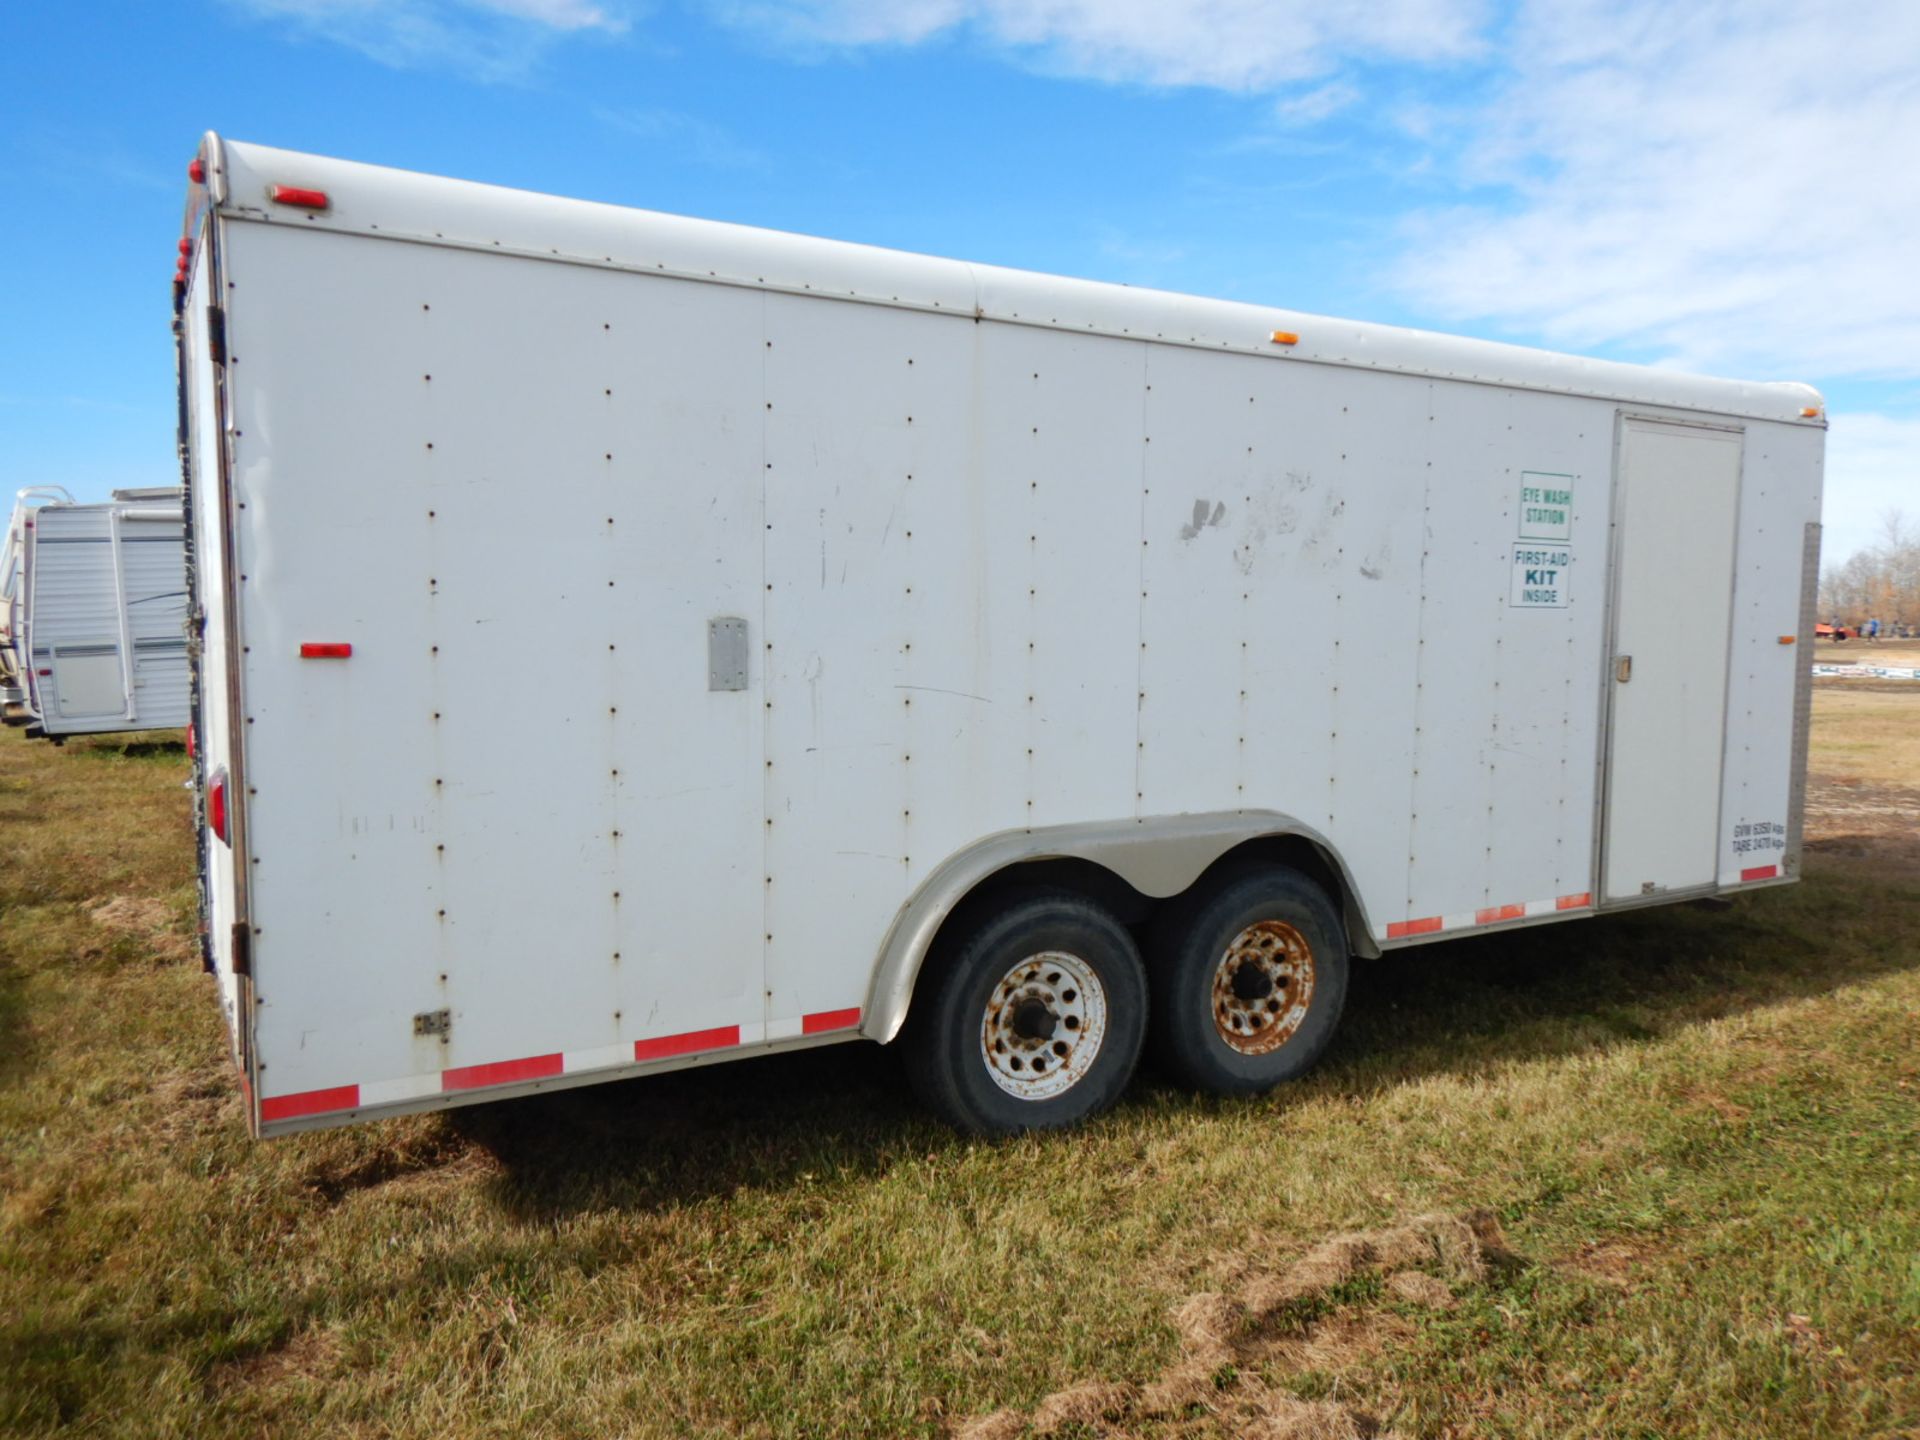 2004 20FTX8FT ENCLOSED TRAILER, T/A, GVWR 6350KG, BARN DOORS, S/N FC200418 - Image 4 of 6